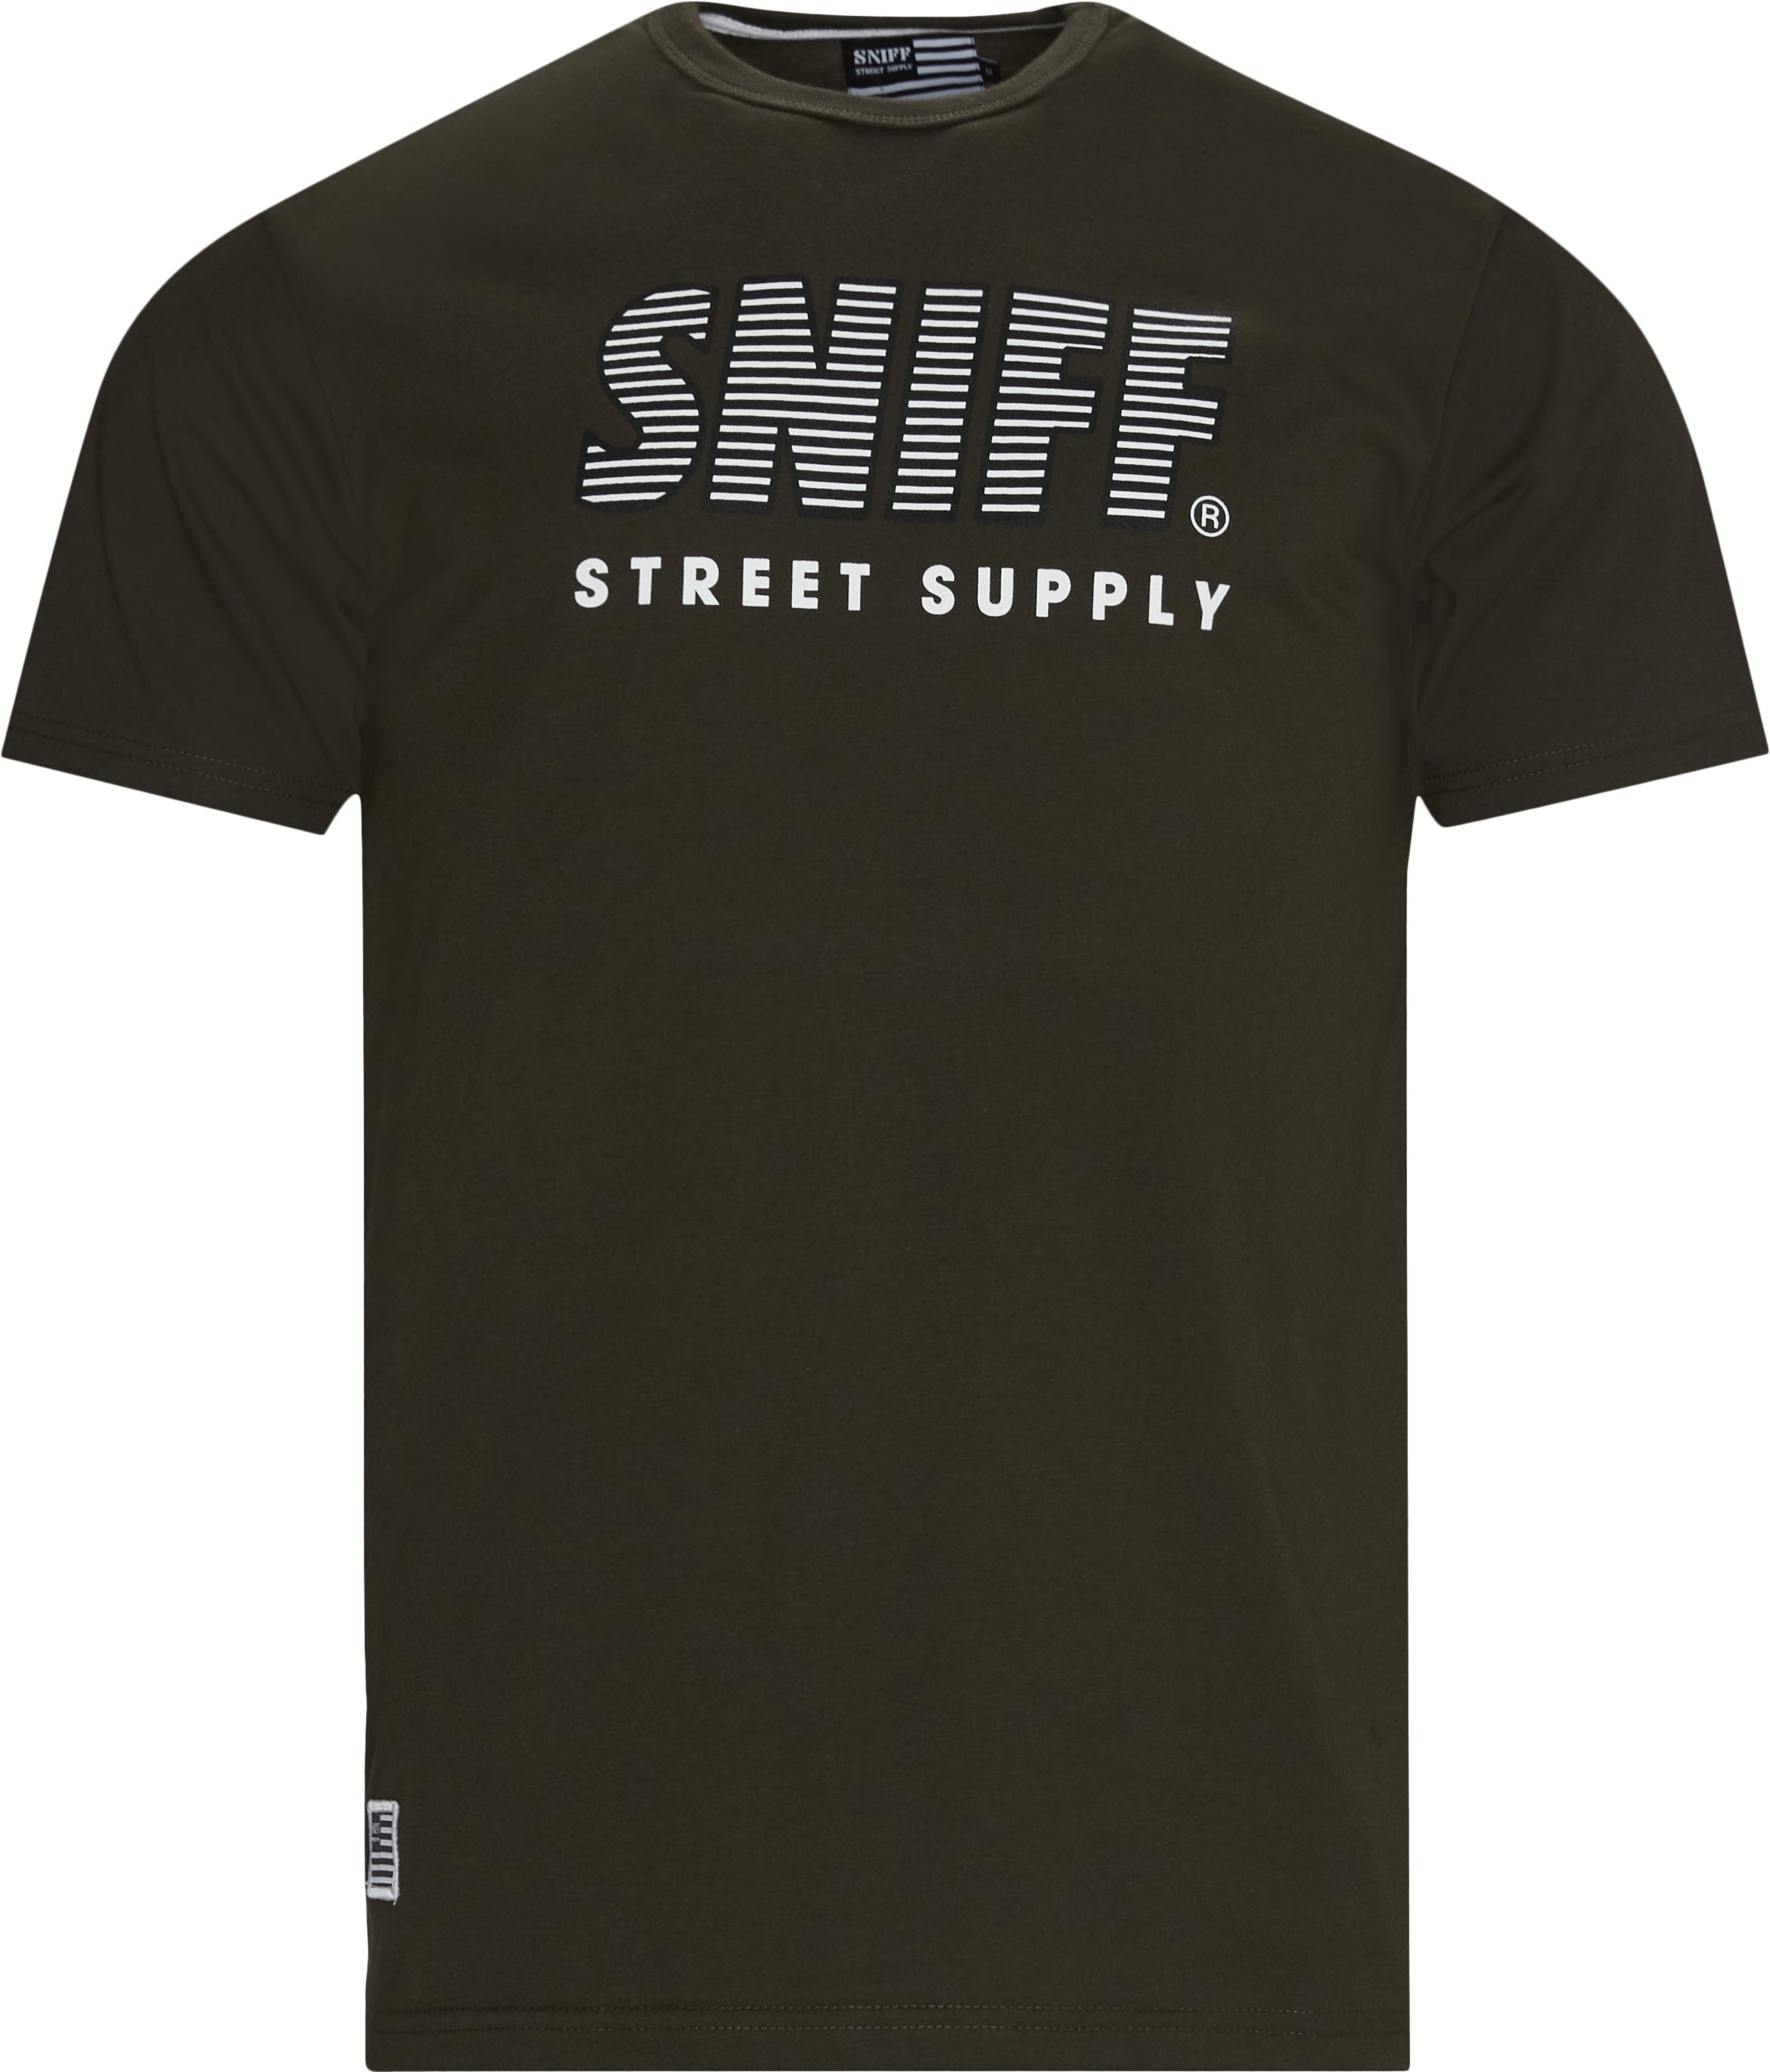 Lives tee - T-shirts - Regular fit - Army